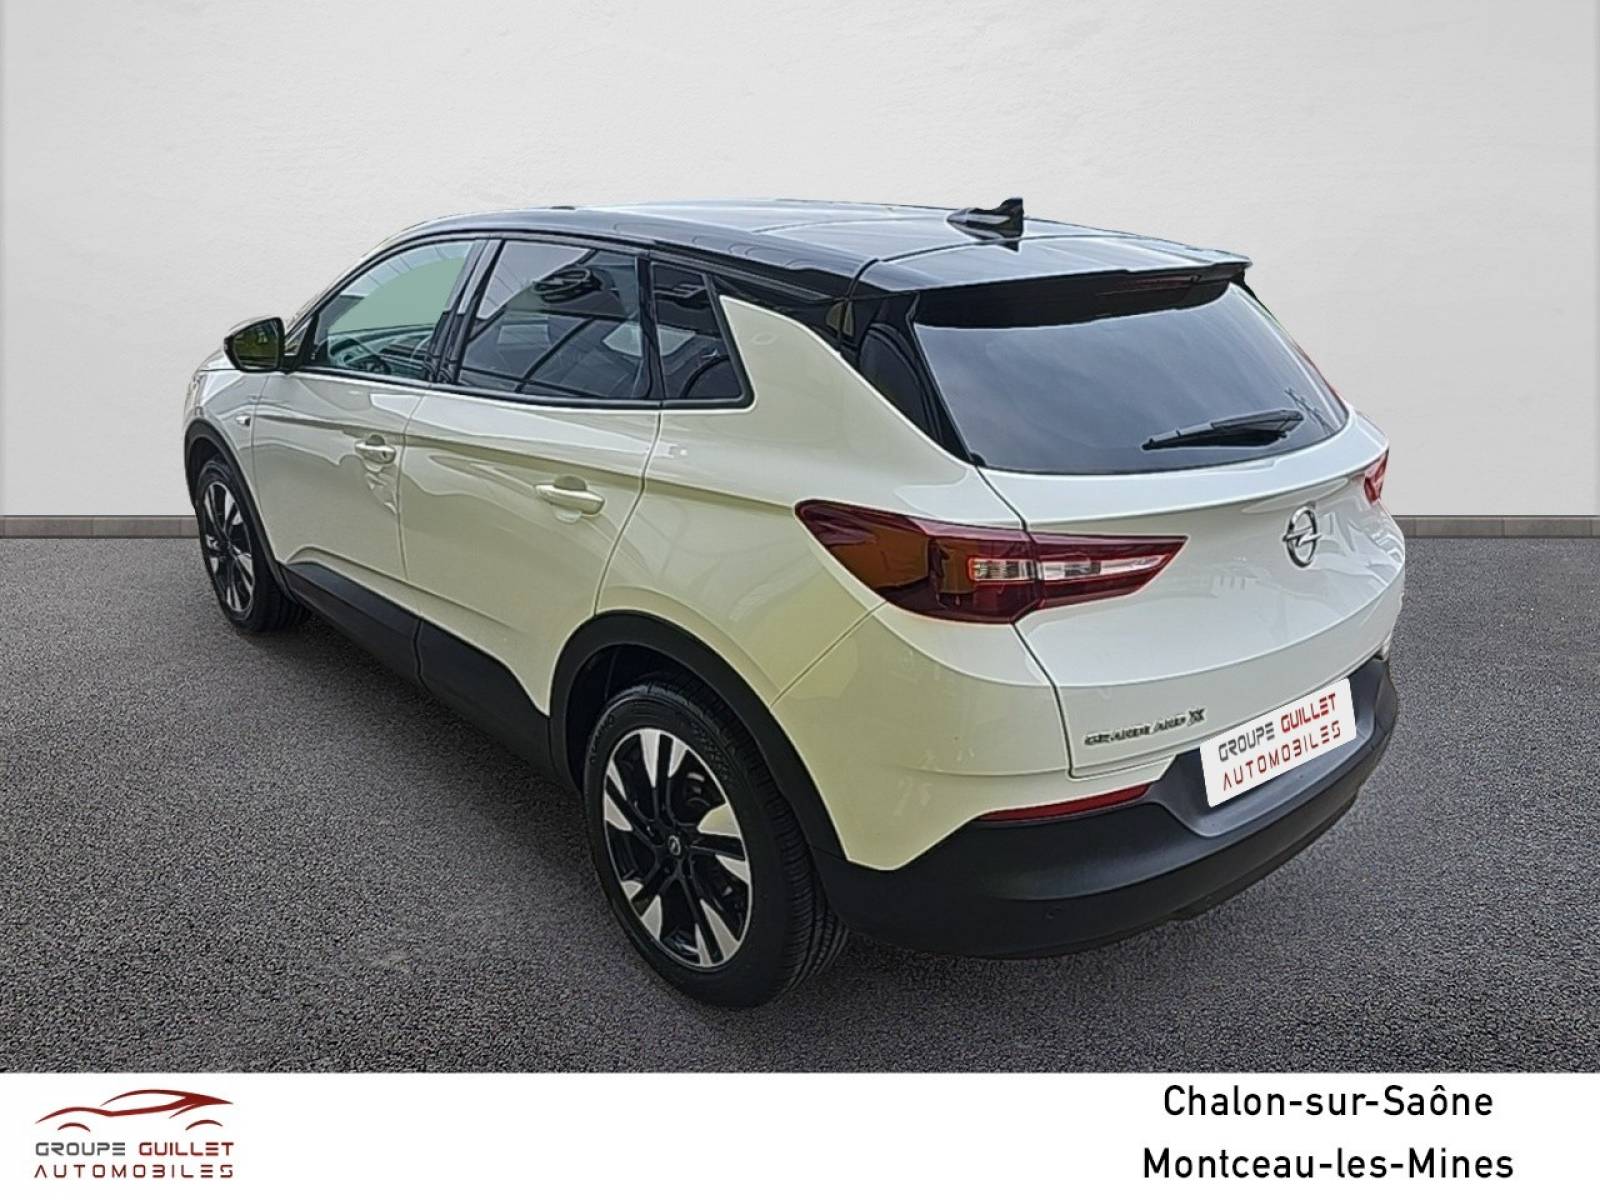 OPEL Grandland X 1.2 Turbo 130 ch - véhicule d'occasion - Groupe Guillet - Opel Magicauto Chalon - 71380 - Saint-Marcel - 7